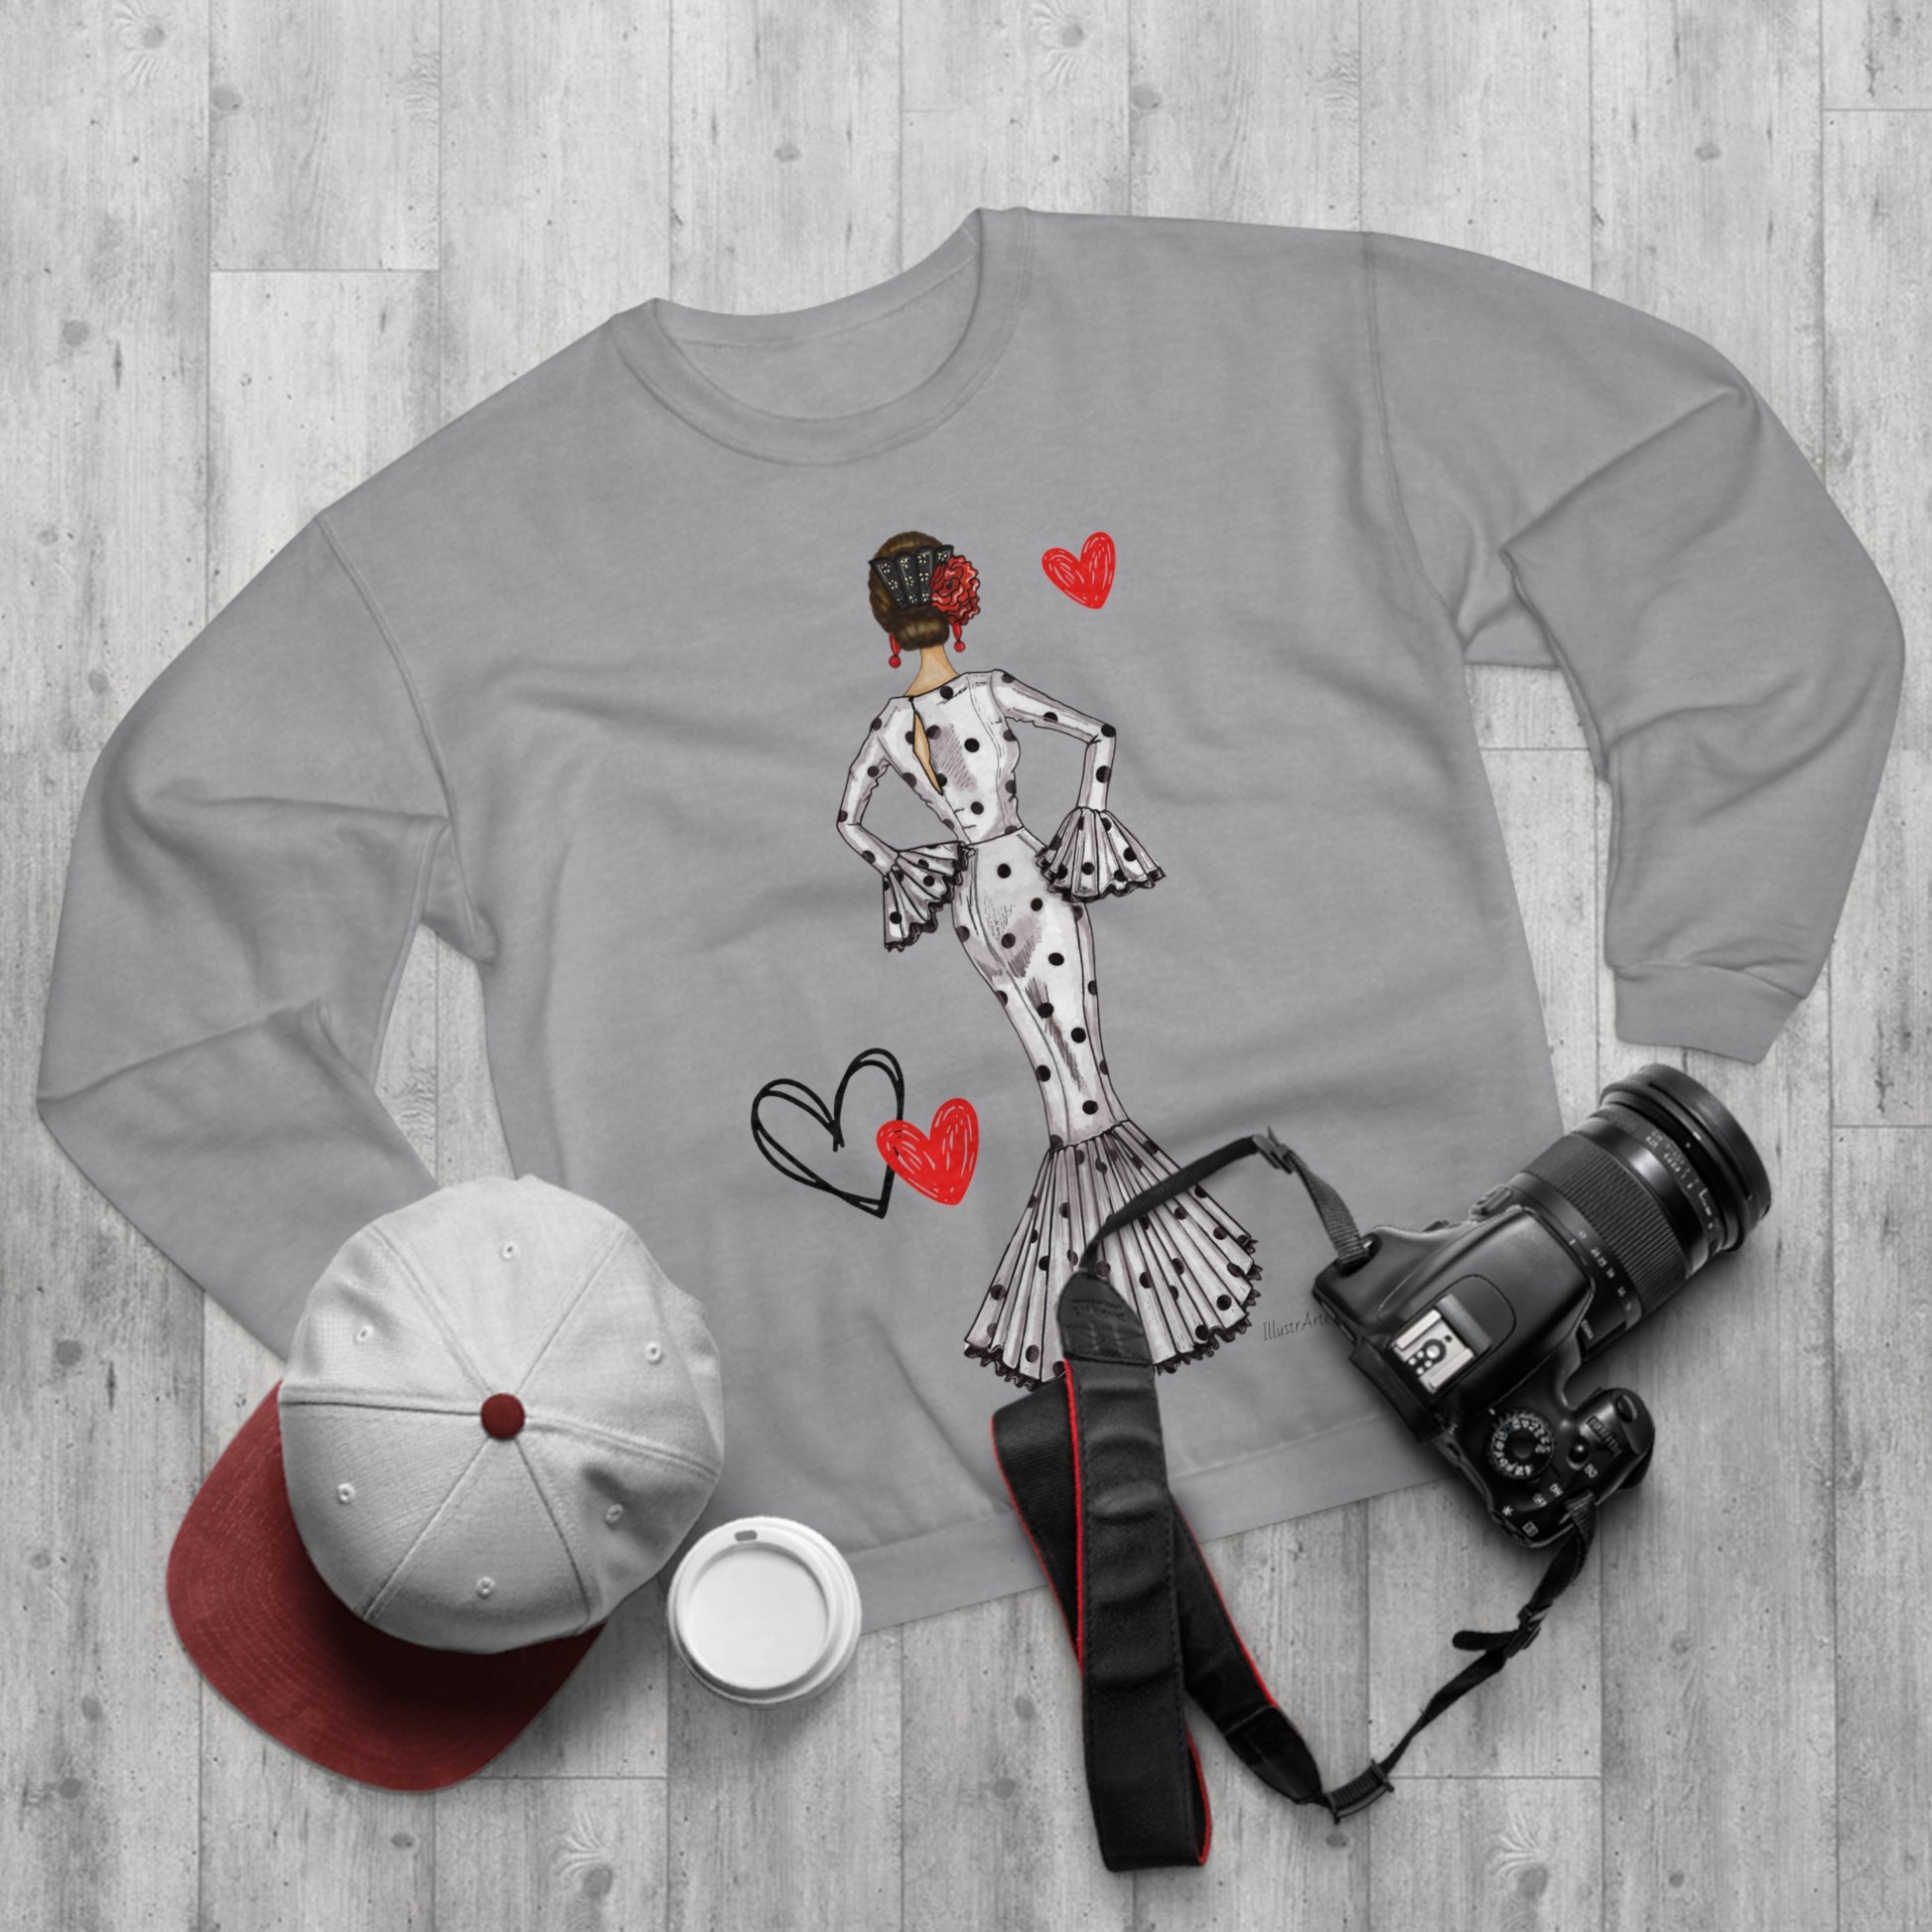 a sweater, hat, camera, and other items laid out on a wooden floor